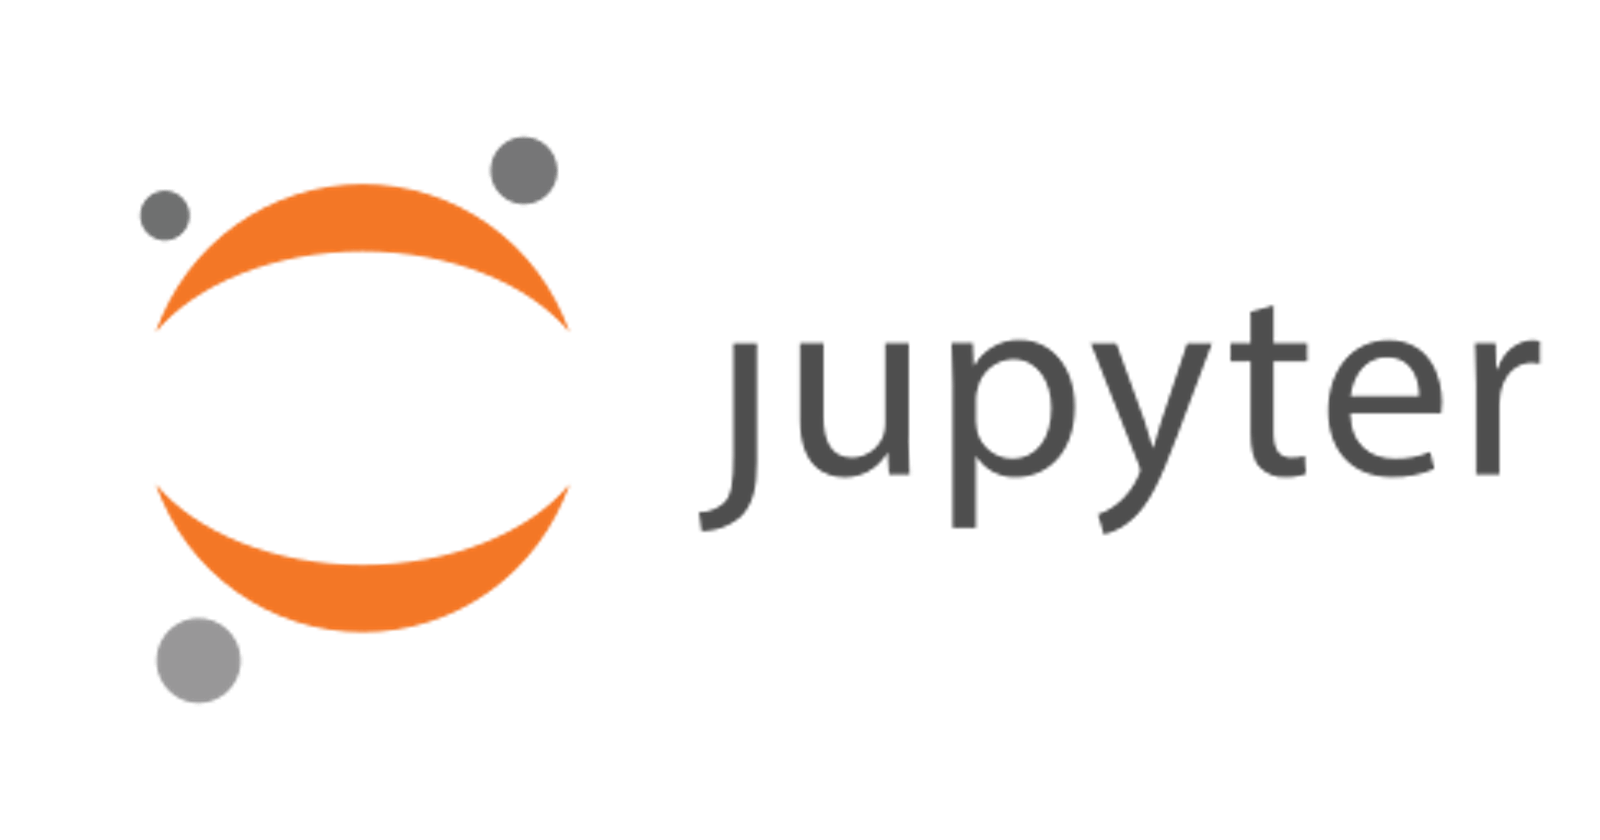 Why Does No Python-Tutorial Mention Jupyter? What?